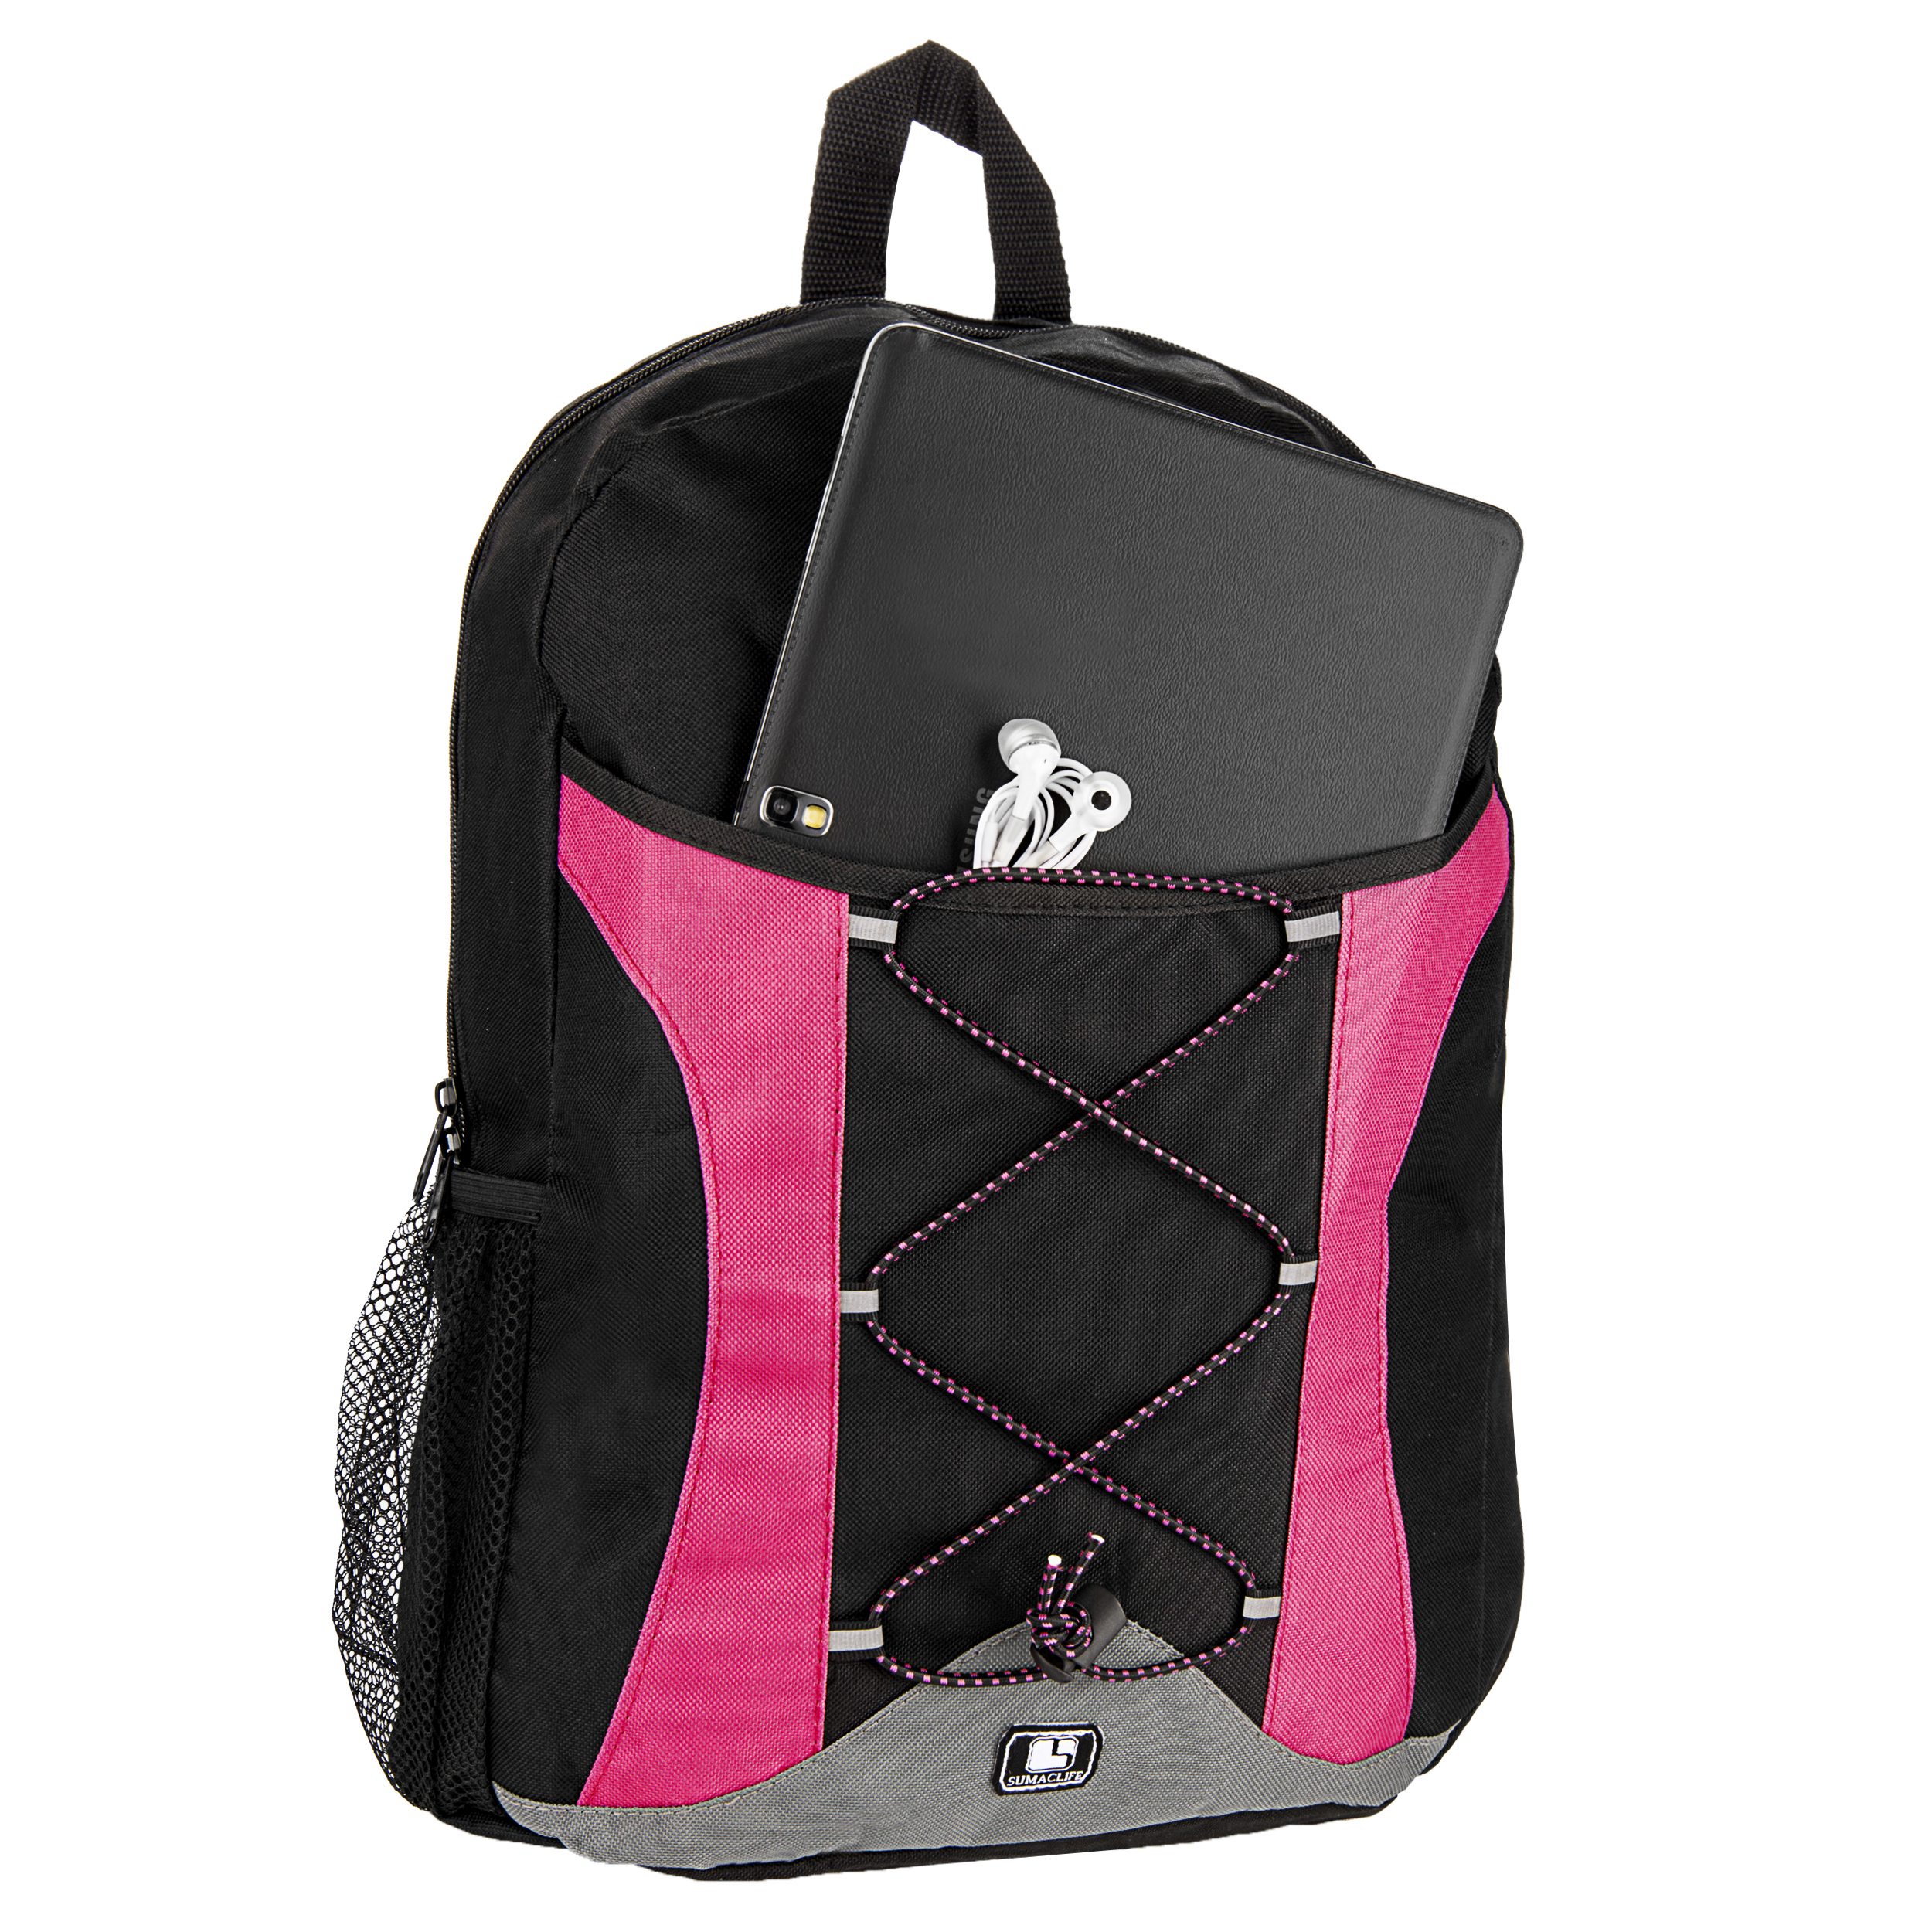 Sports Backpack for Men and Women, Gym Workout Backpack with 15.6 Inch Laptop Compartment - image 5 of 7